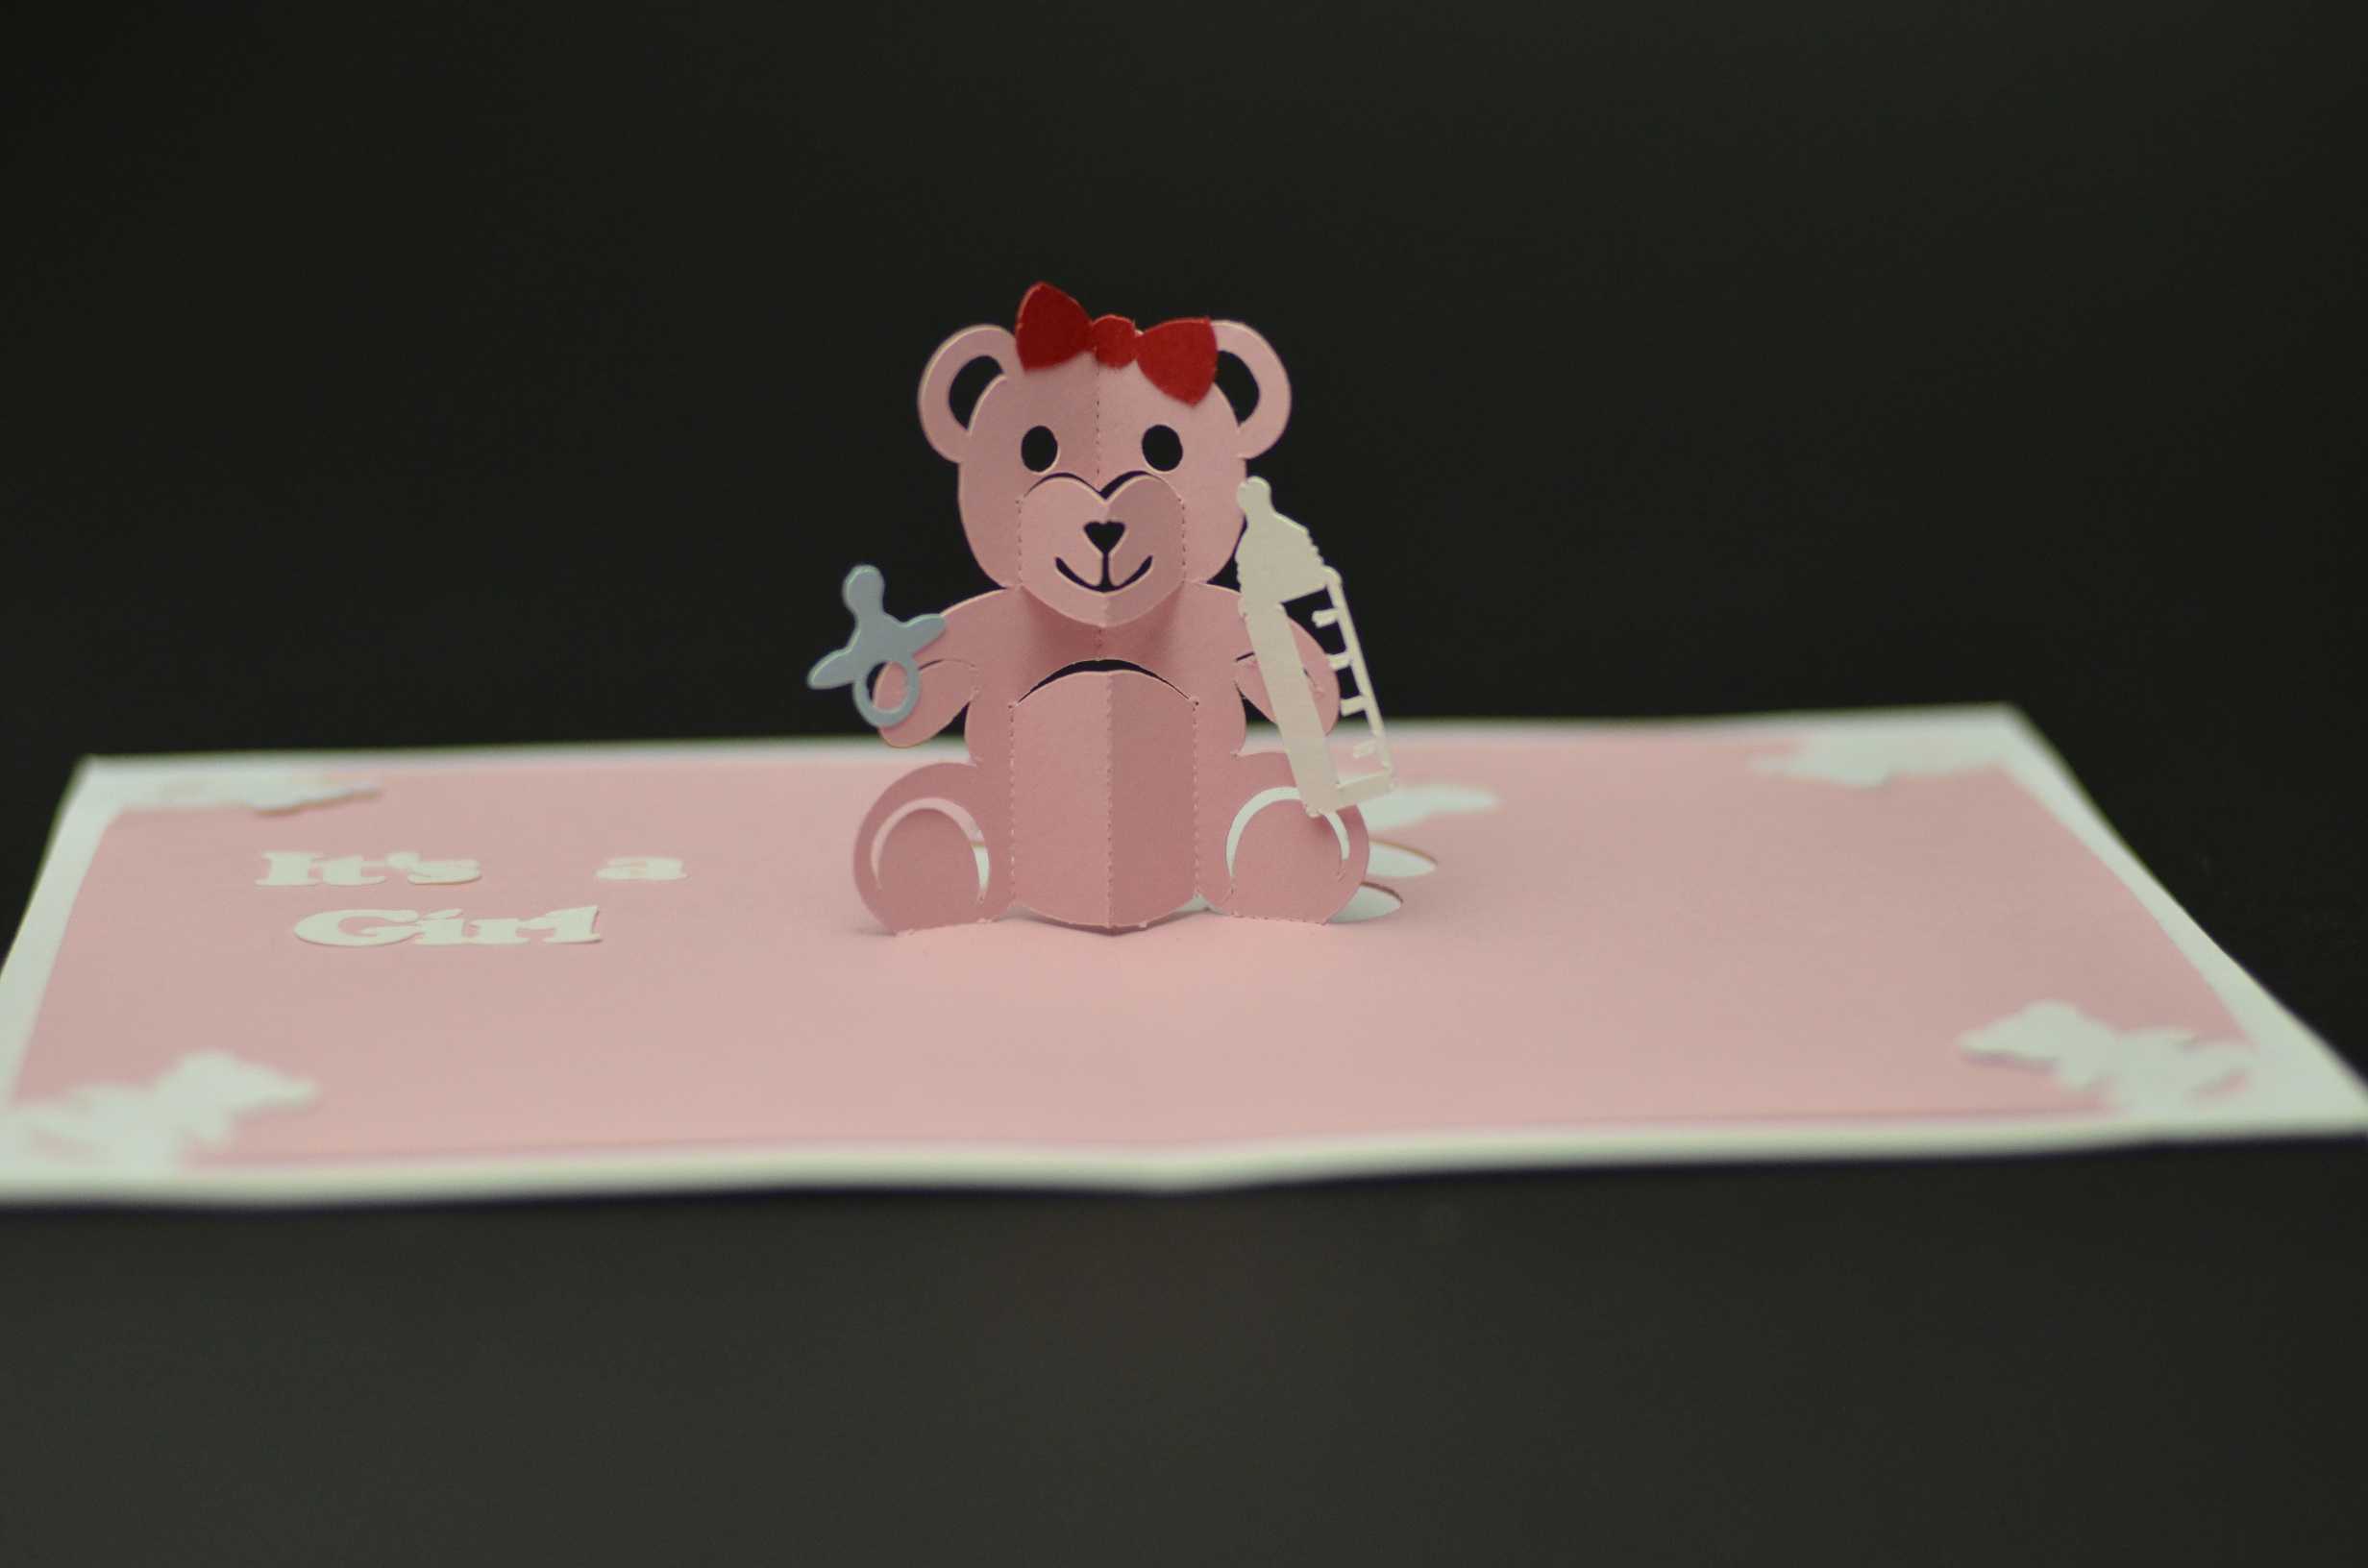 Teddy Bear Pop Up Card: Tutorial And Template – Creative Pop With Regard To Teddy Bear Pop Up Card Template Free